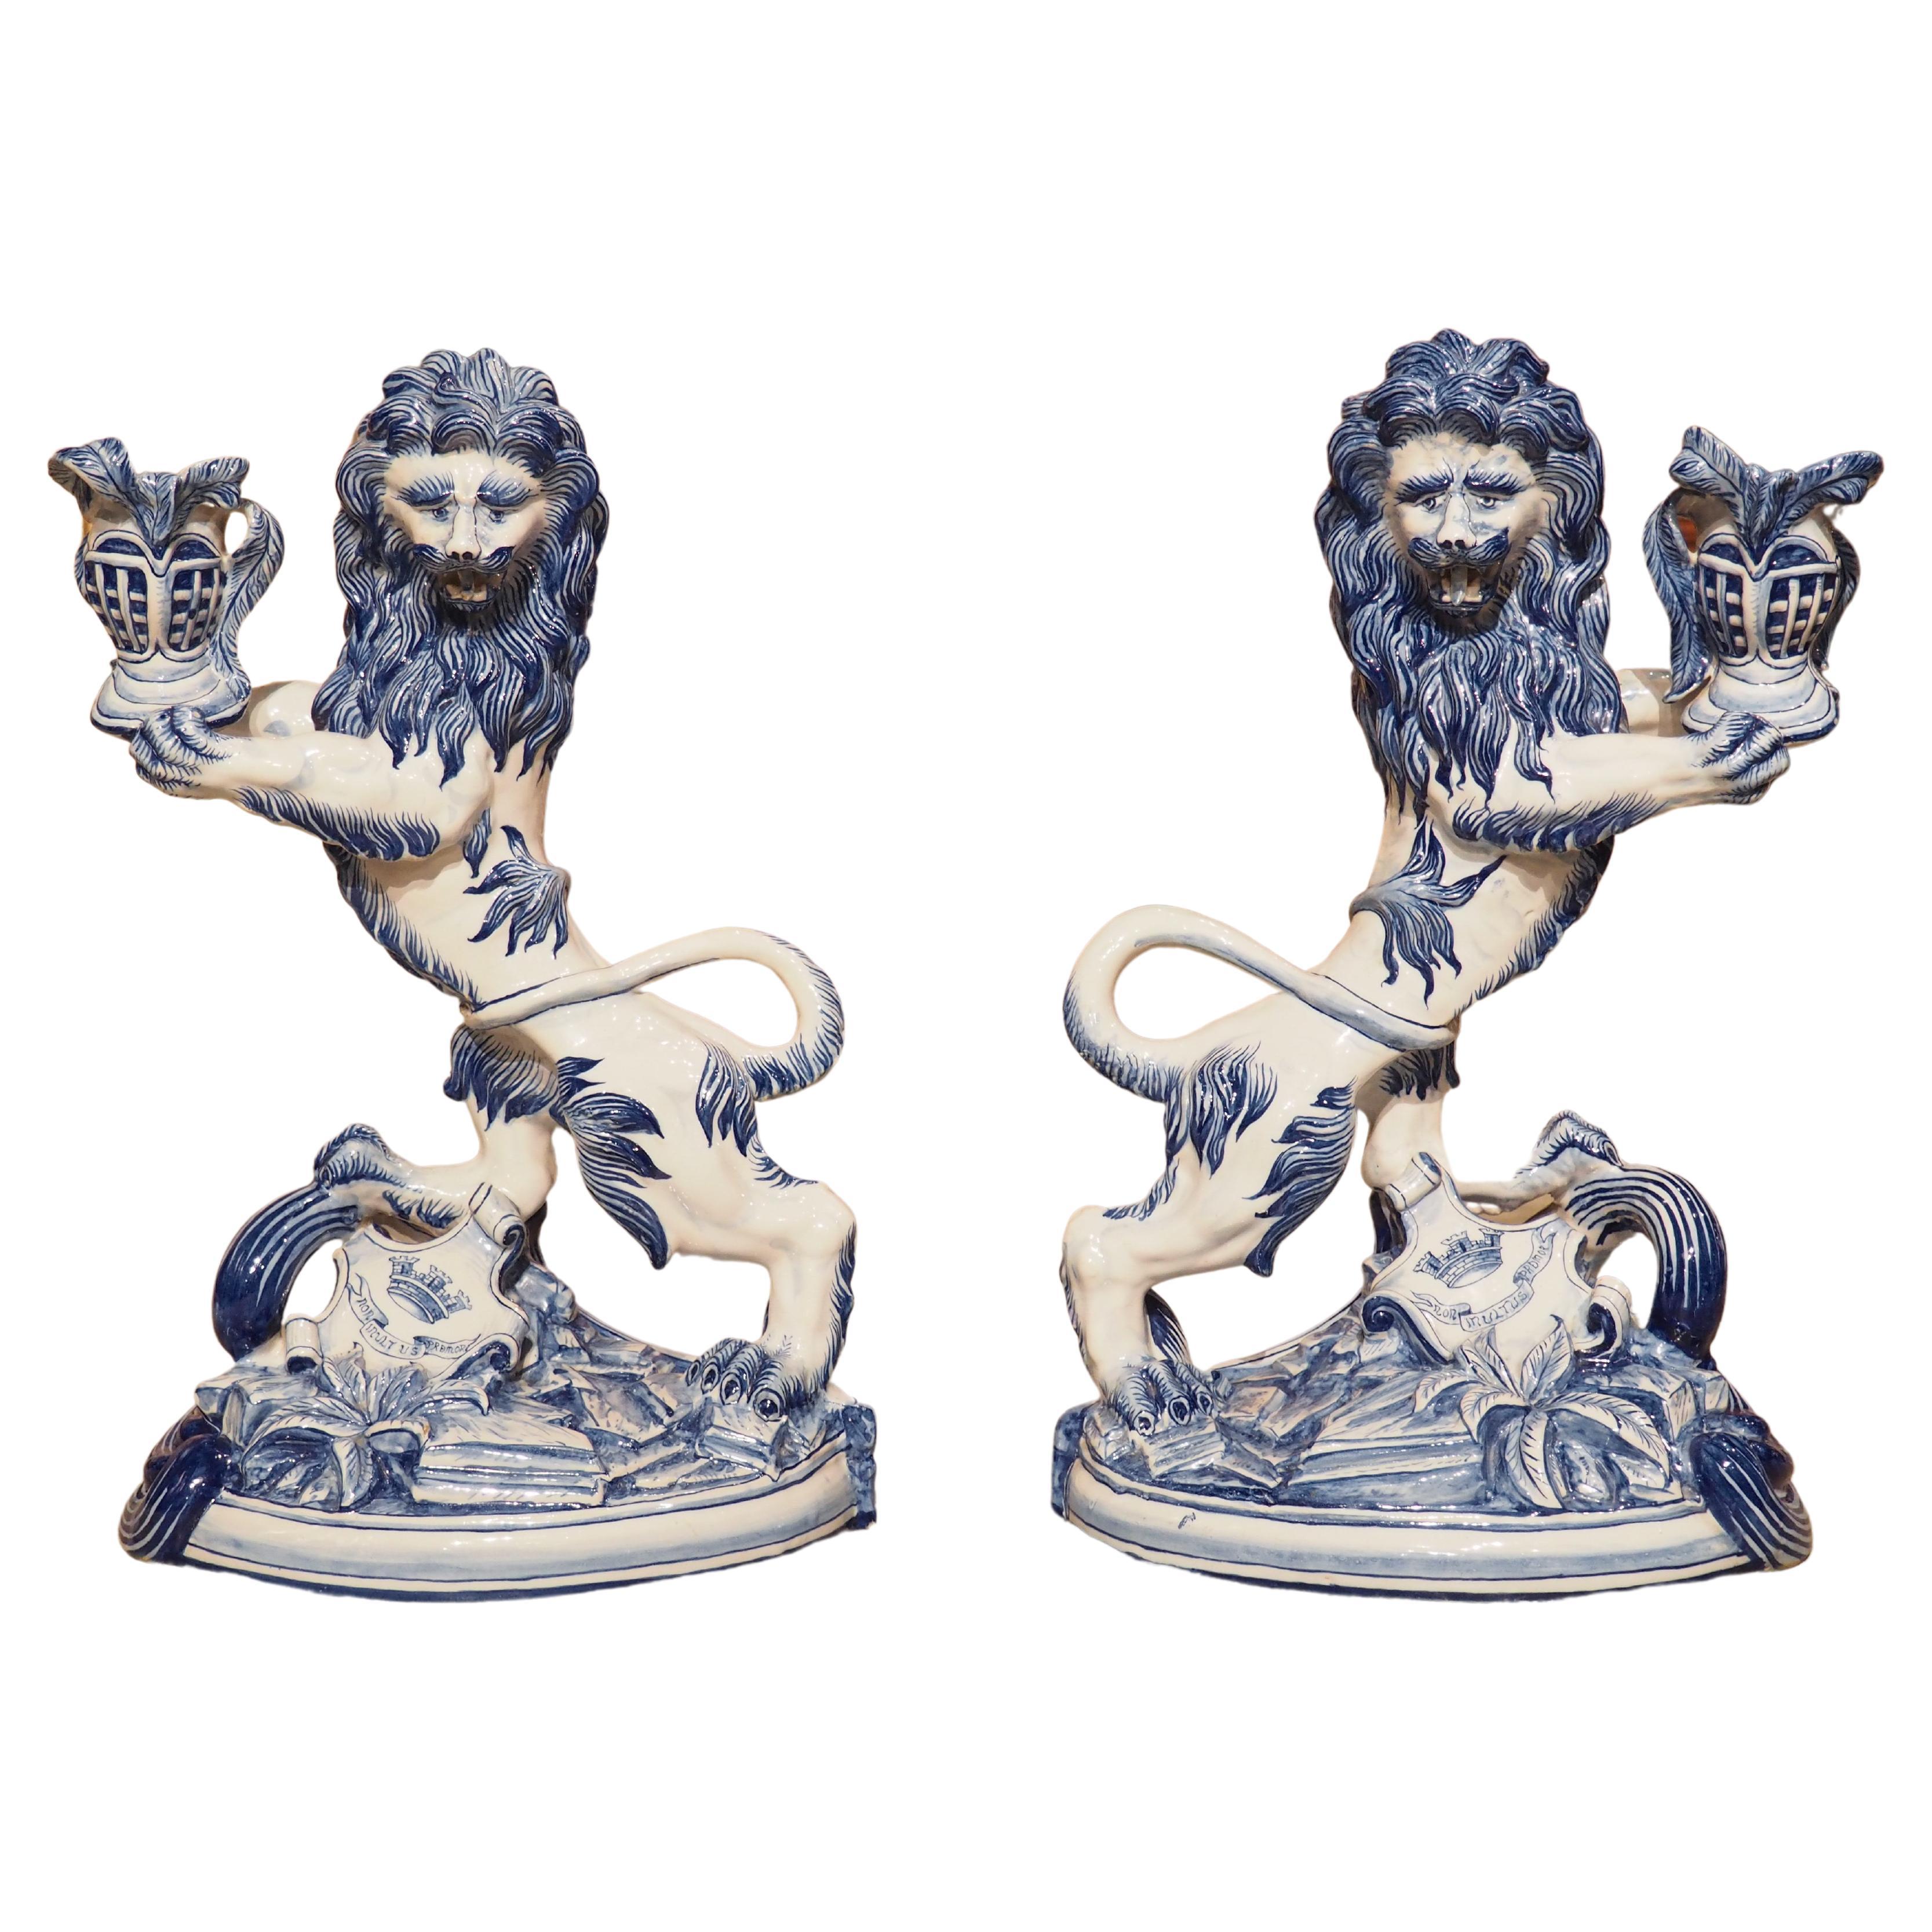 Pair of Antique French Blue and White Saint-Clément Faience Lion Candle Holders